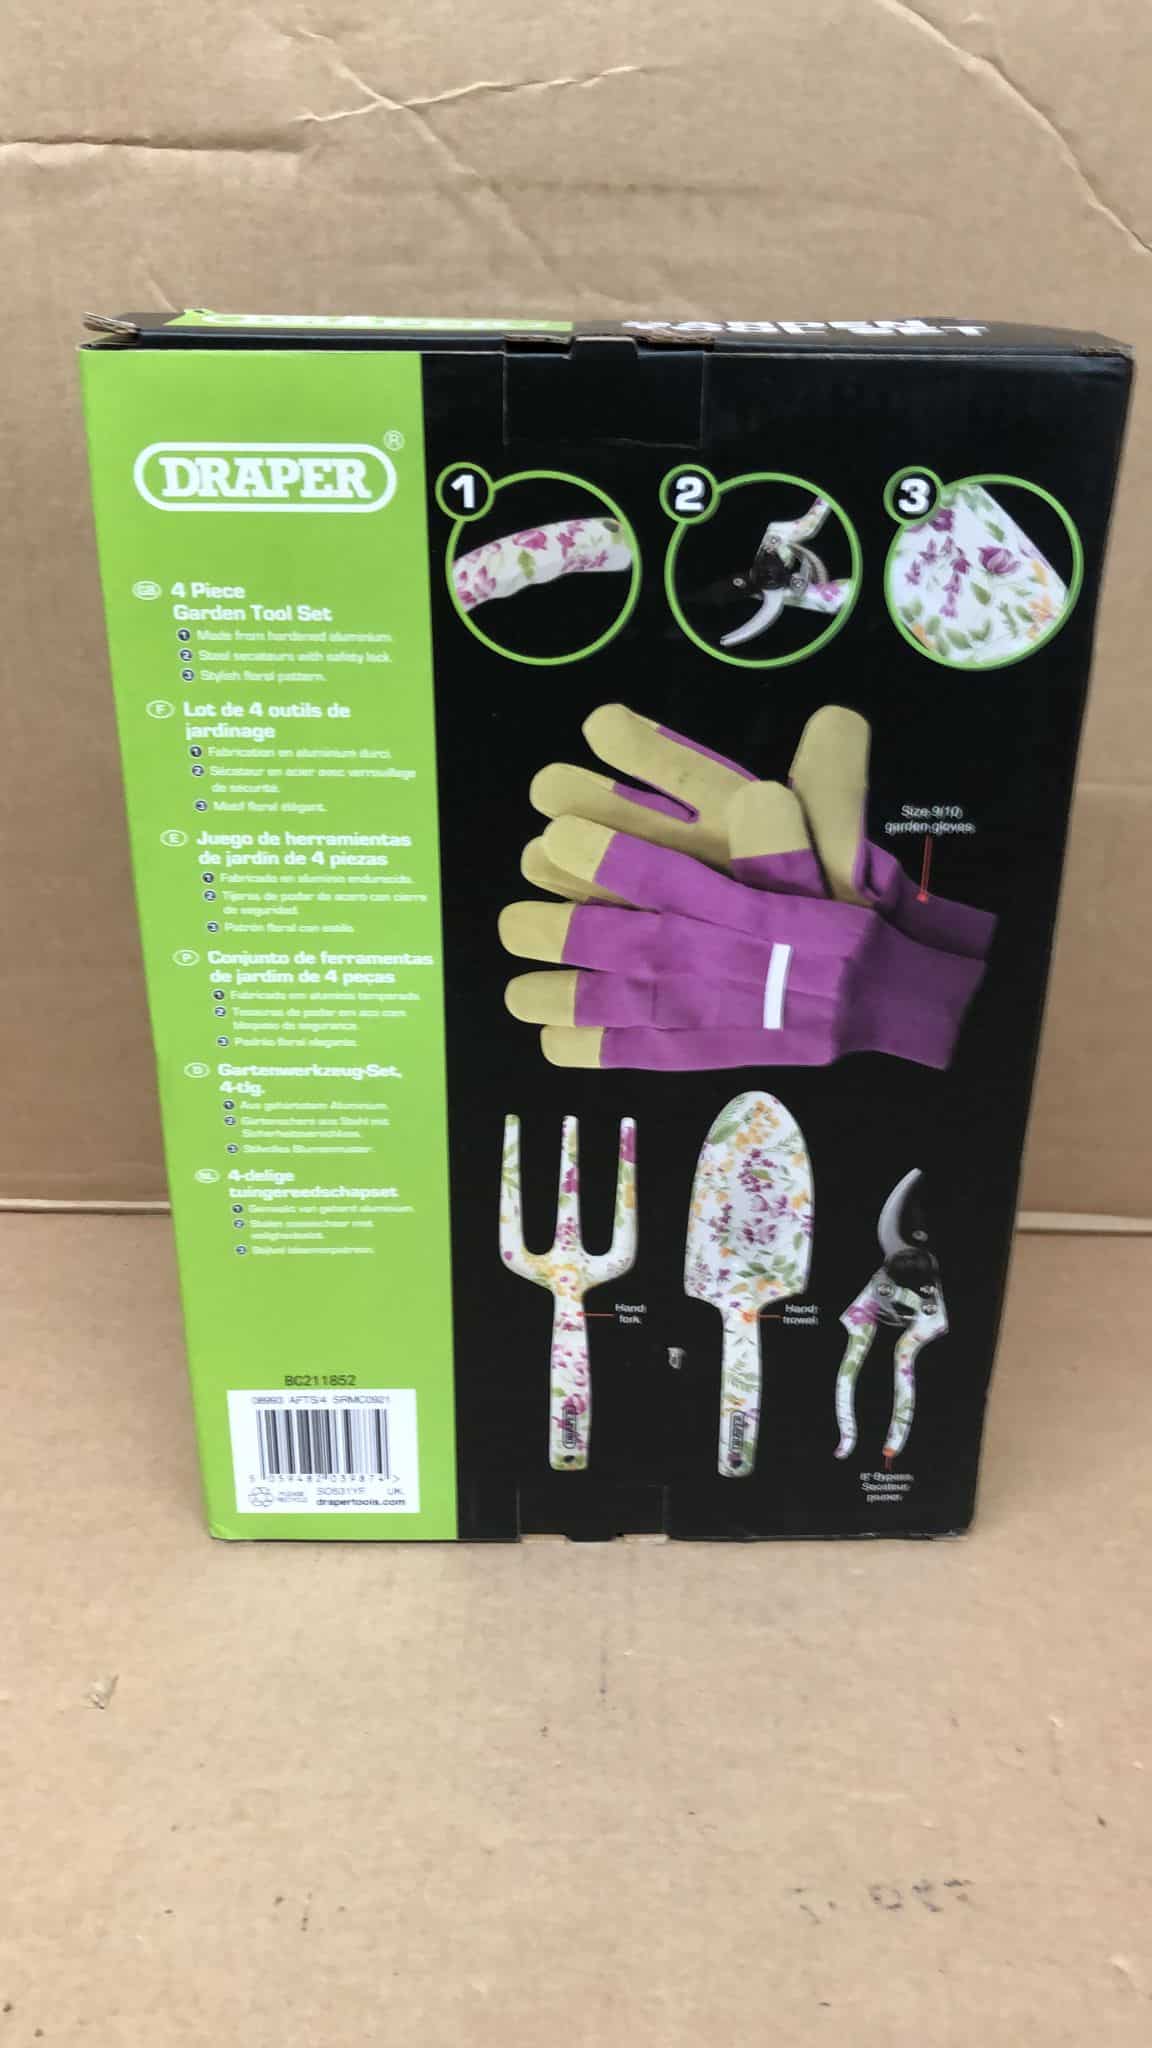 Draper Garden Tool Set with Floral Pattern 08993-9874